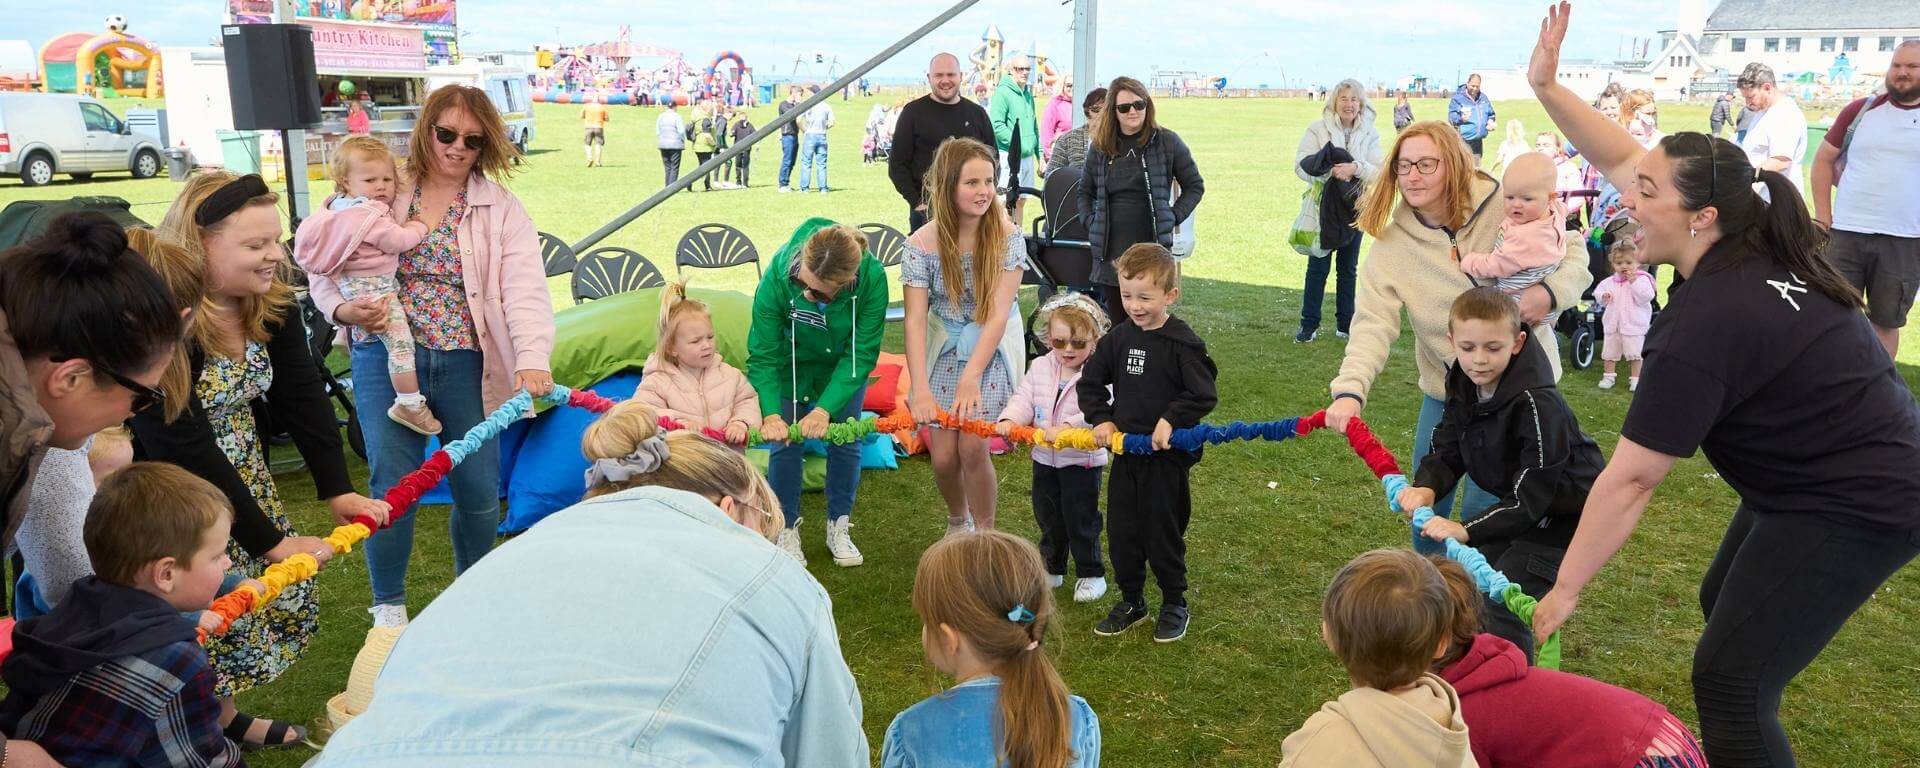 Parents and young children at an outdoor event.